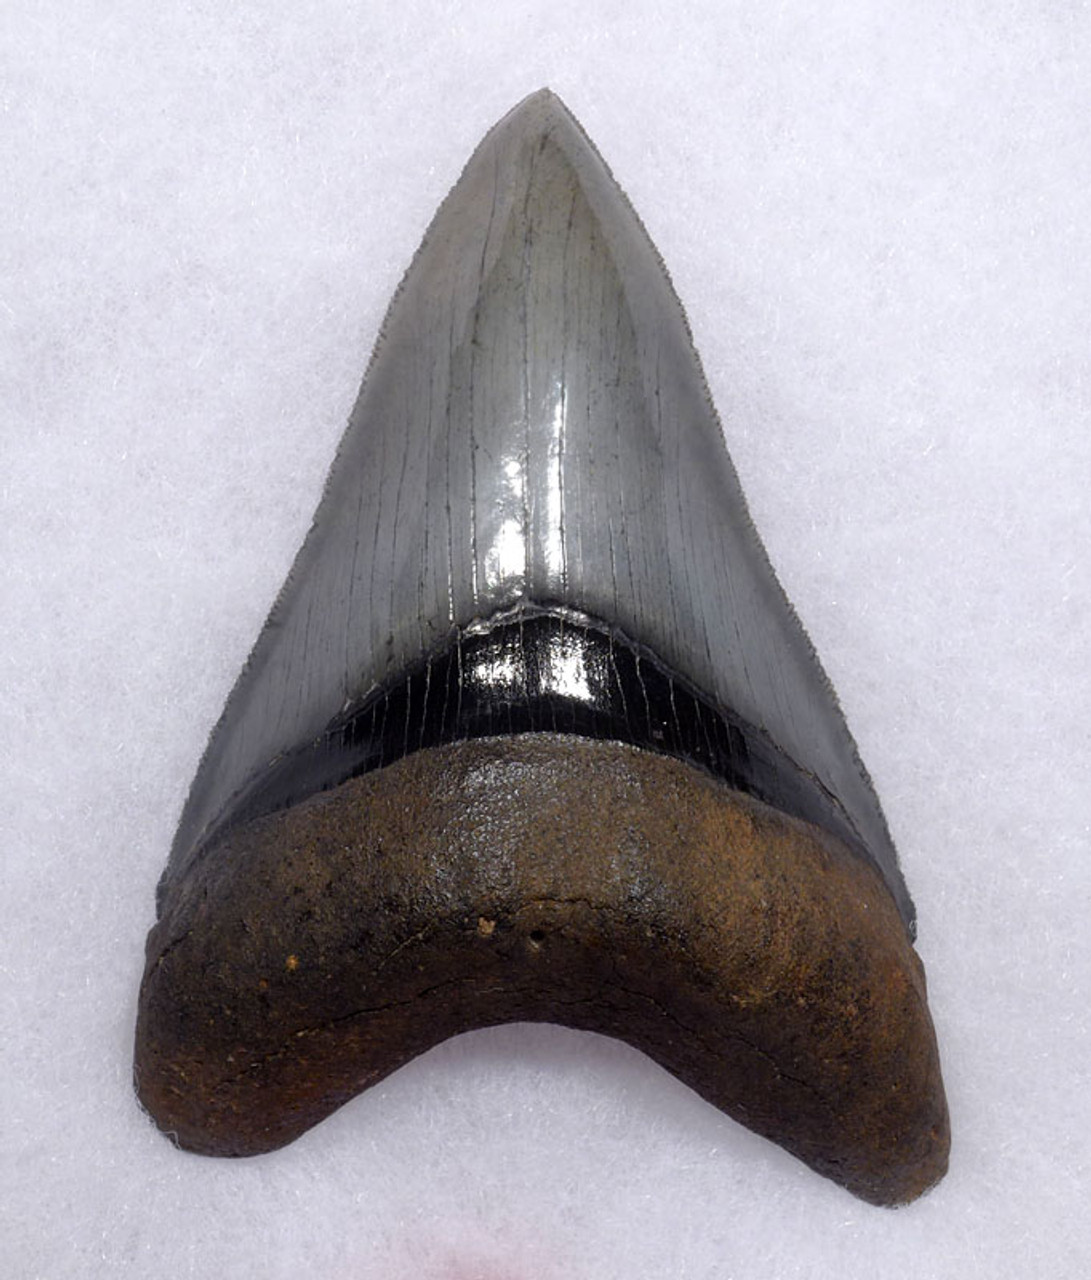 SH6-407 - COLLECTOR GRADE MEGALODON SHARK STABBING LOWER JAW TOOTH 4.6 INCHES LONG